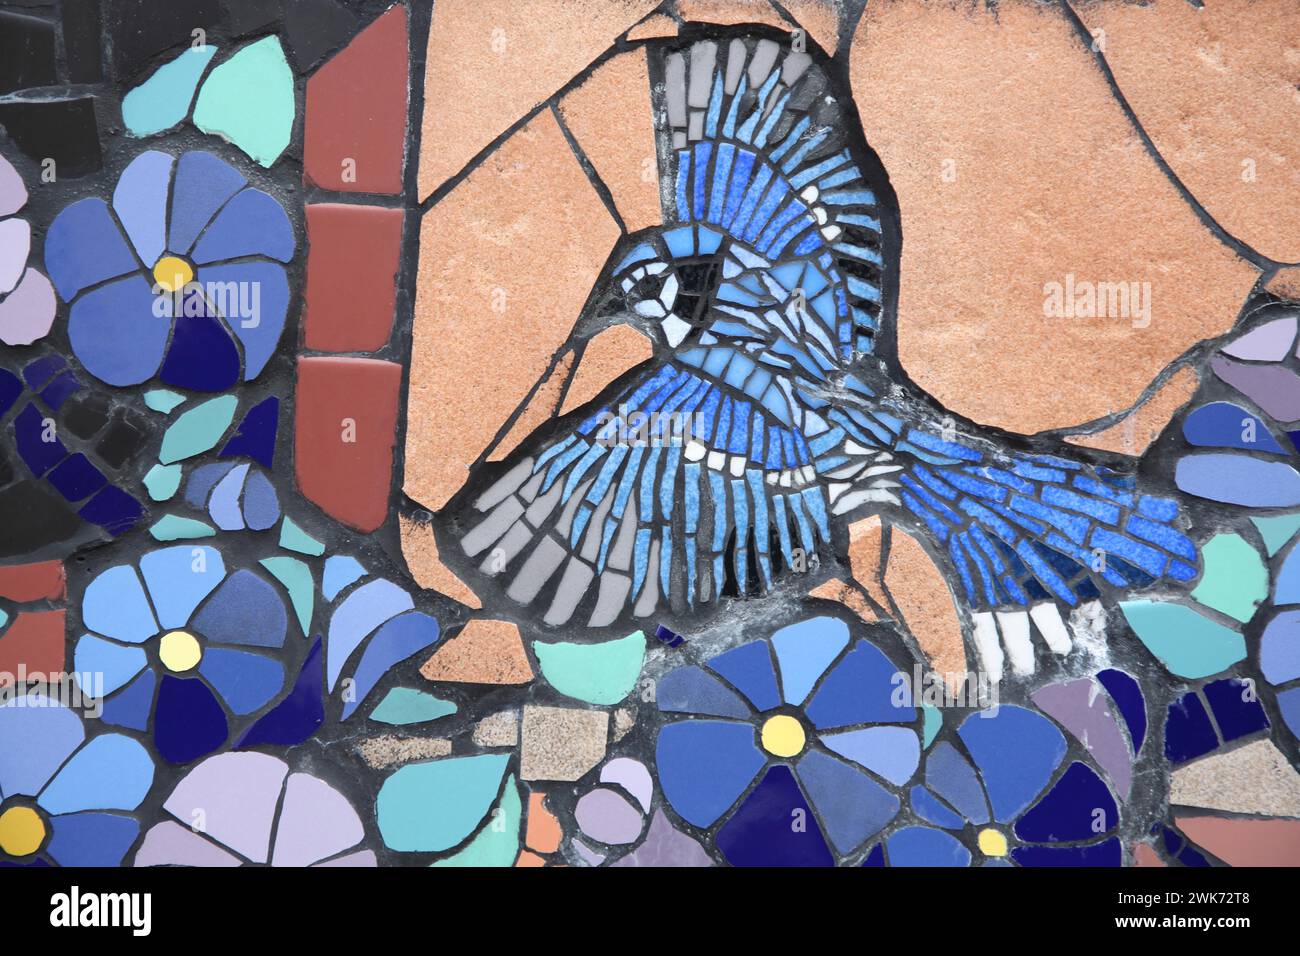 Wall mosaic with blue jay by Isidora Paz Lopez 2019, one, blue, Floridian jay, bird figure, flower figures, handicrafts, tiles, tiles, Lopez, rock Stock Photo